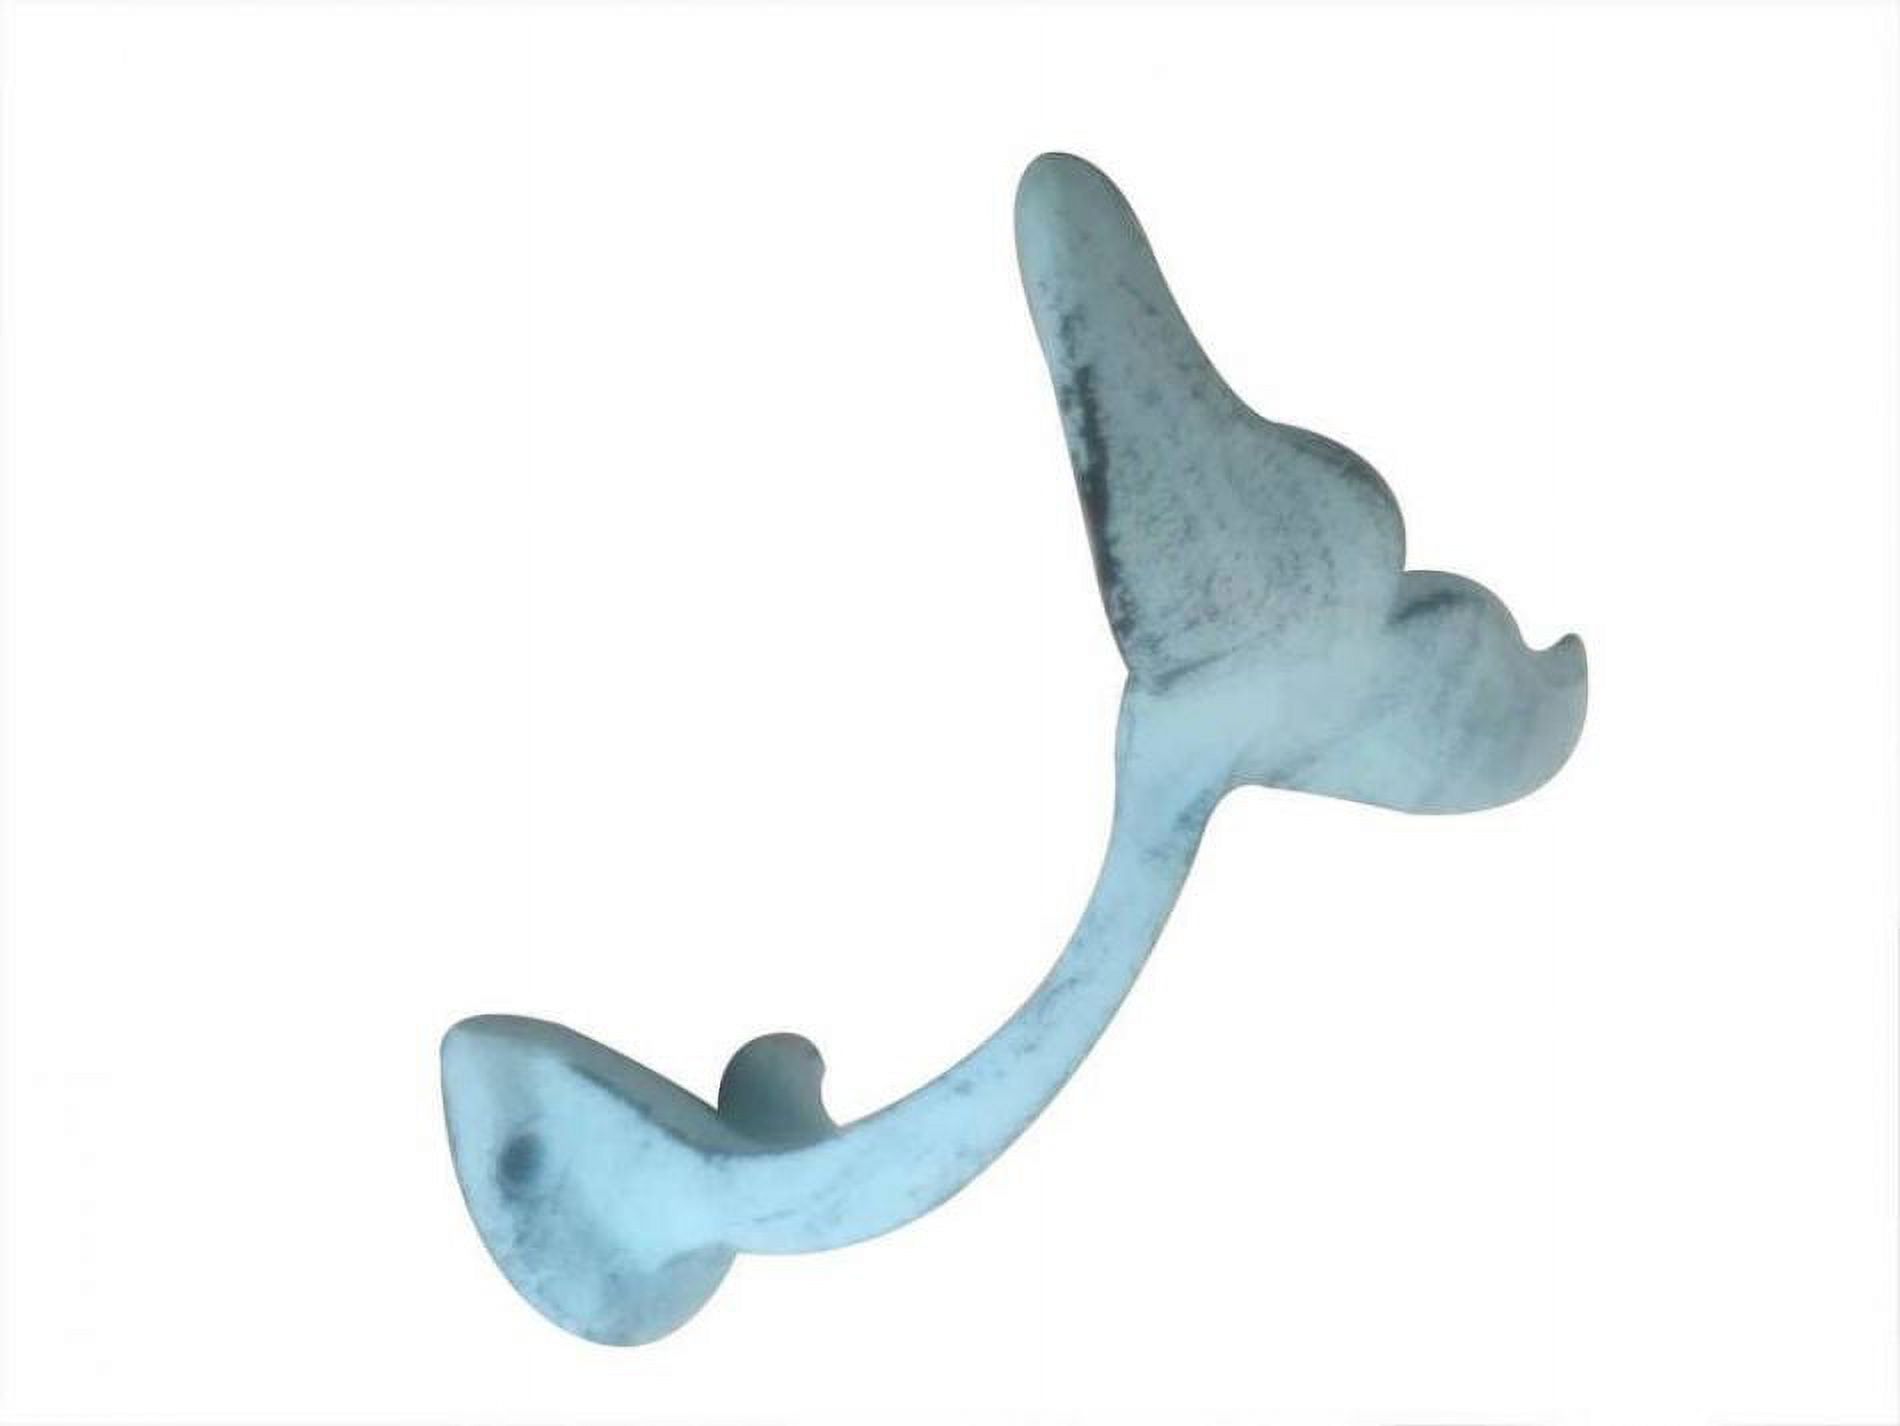 Handcrafted Model Ships K-0178-blue 5 in. Rustic Dark Blue Whitewashed Cast Iron Decorative Whale Tail Hook - image 2 of 2